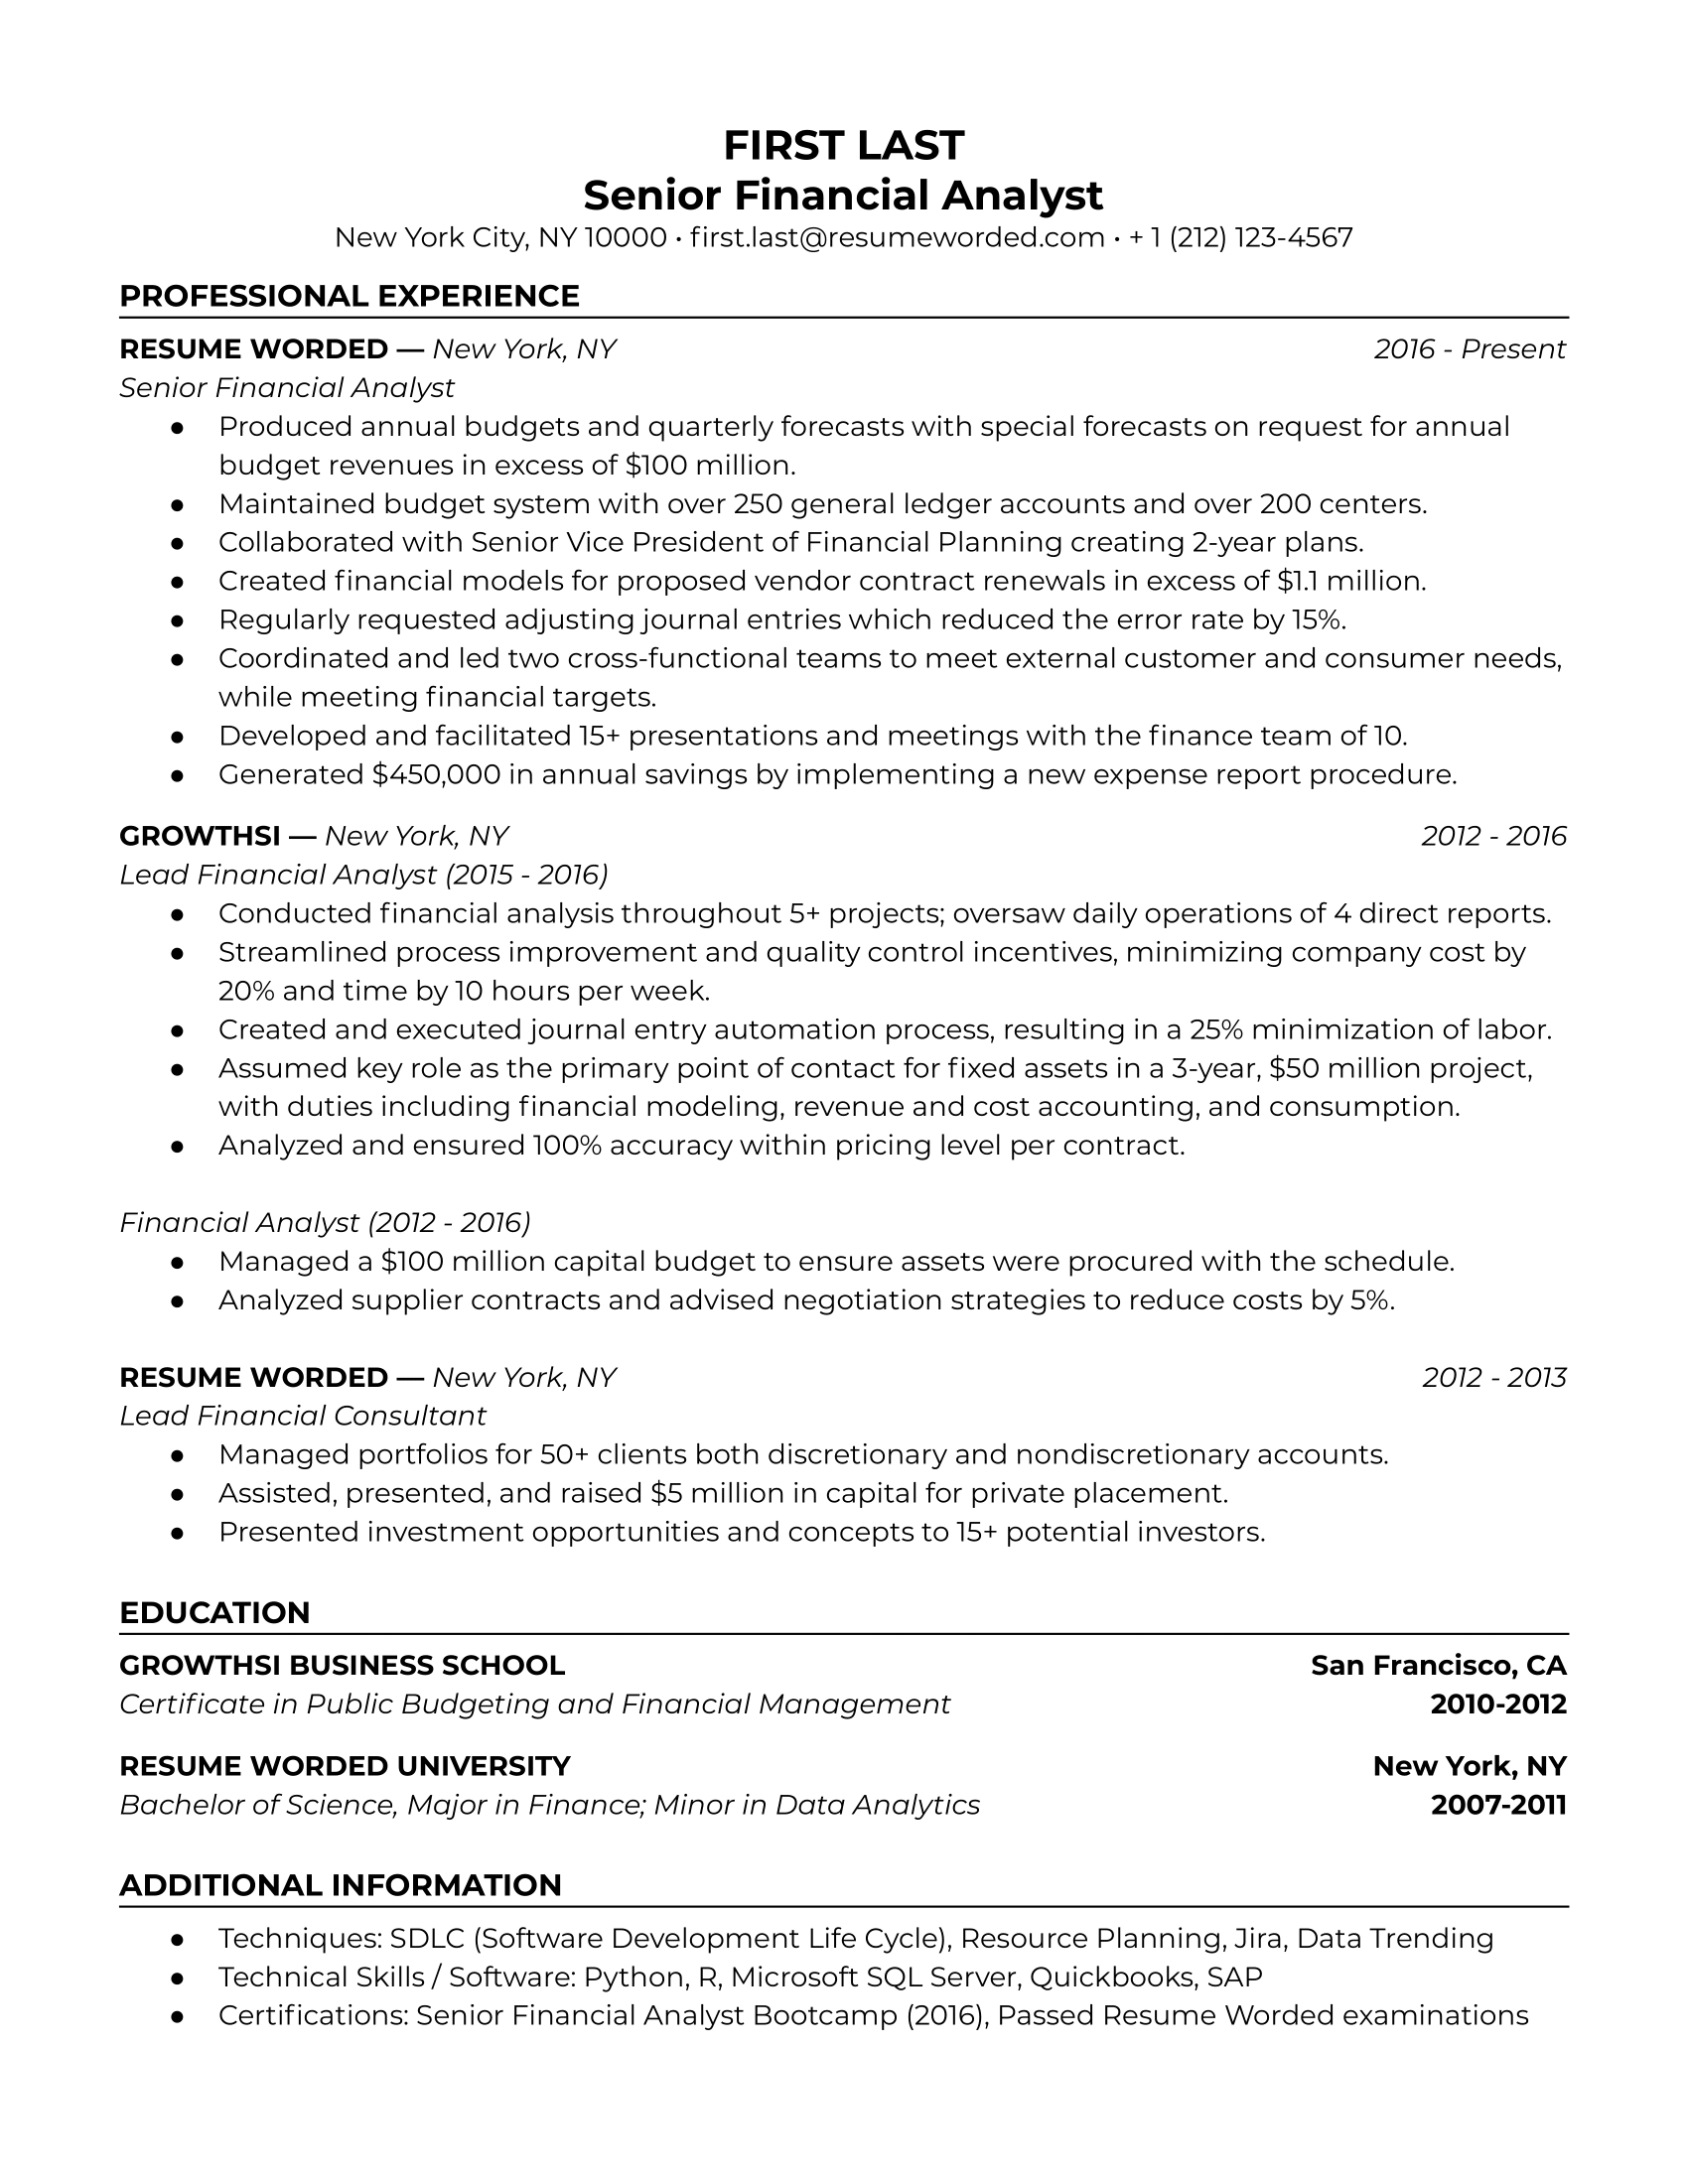 Senior Financial Analyst Resume Template + Example